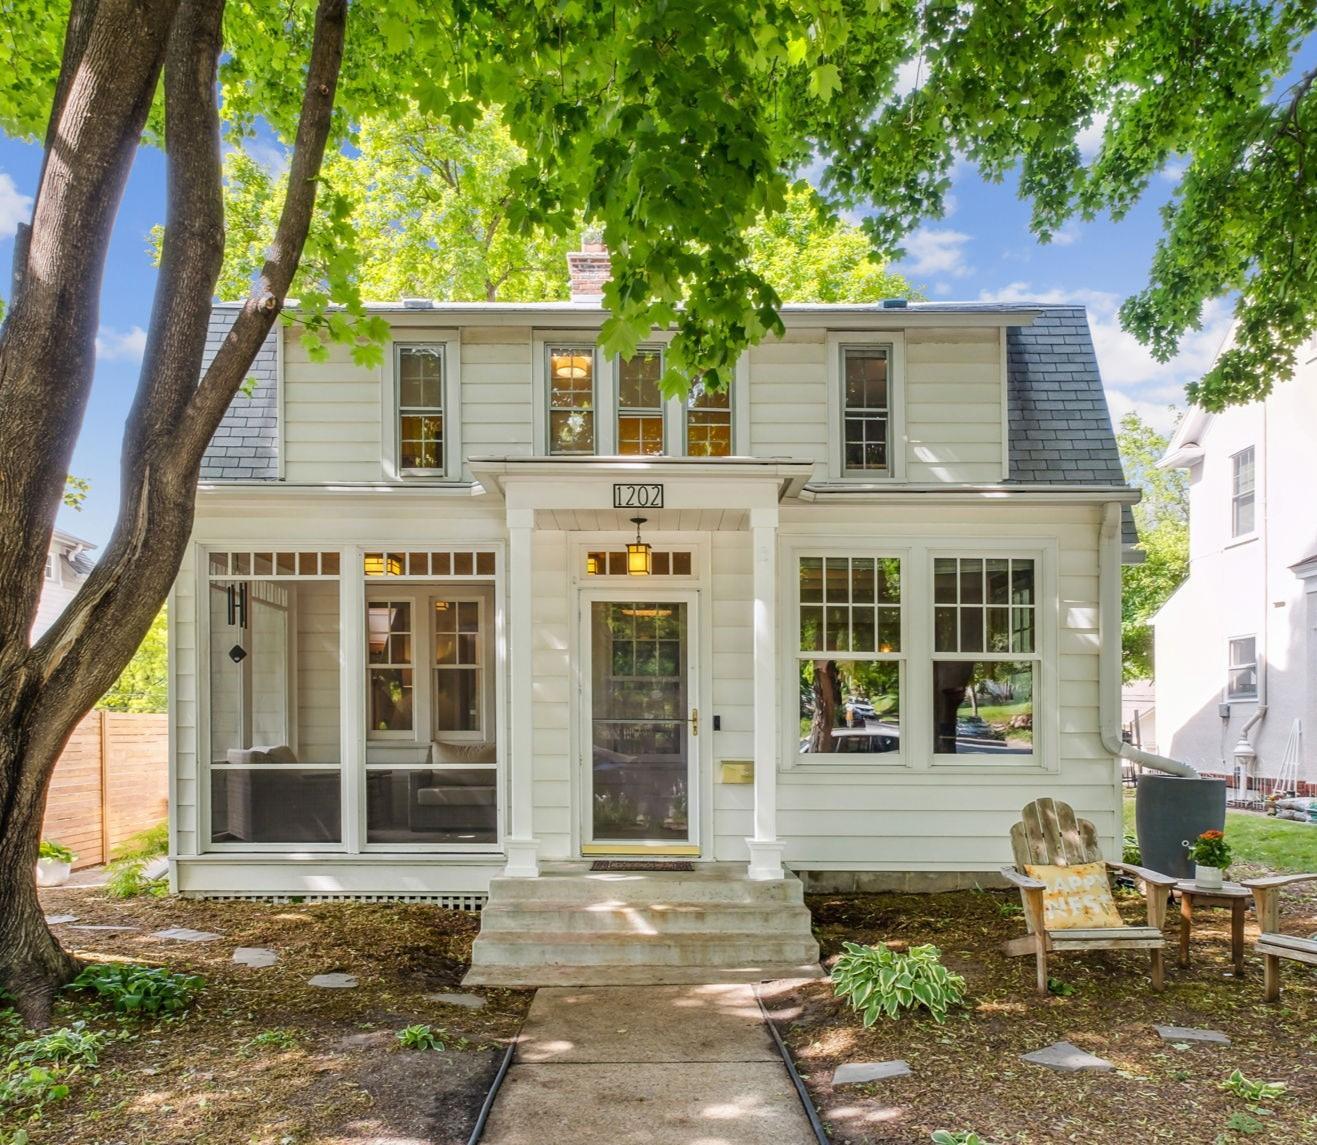 Welcome to 1202 W 53rd St. This beautiful home is 1-block off Minnehaha Creek in the Lynnhurst Neighborhood. Minutes to downtown and 50th & France. Please check out the video tour as well!